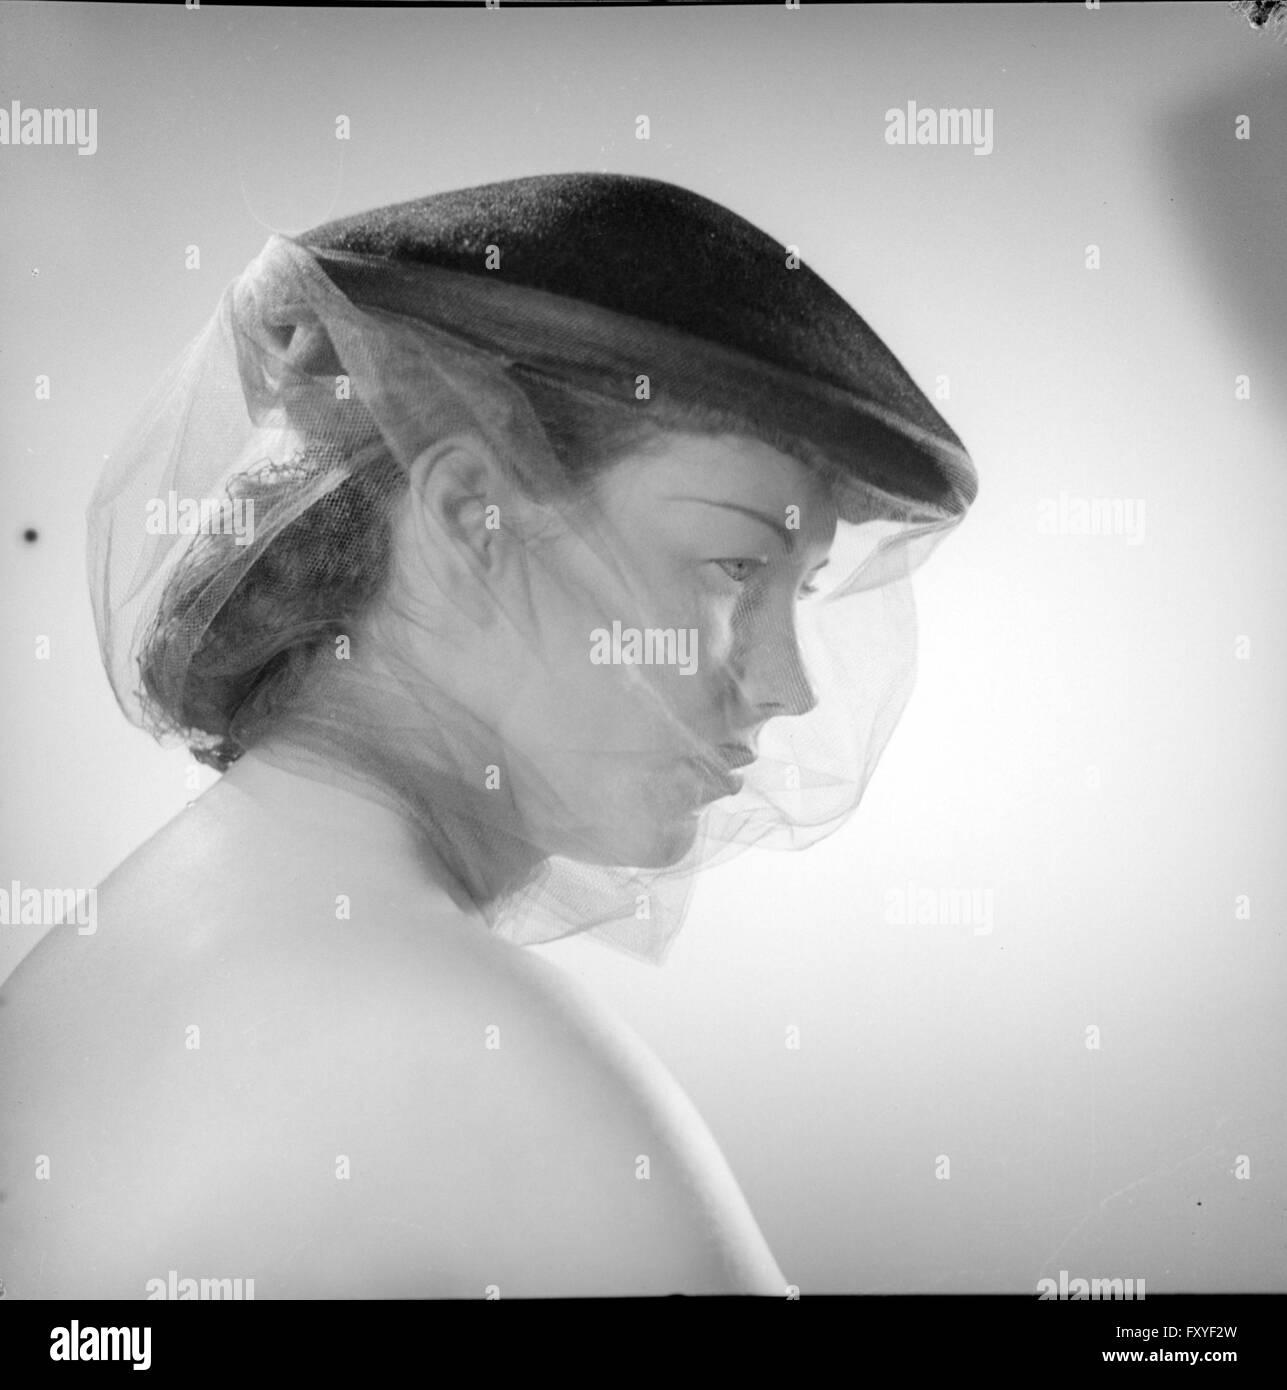 L women Black and White Stock Photos & Images - Alamy